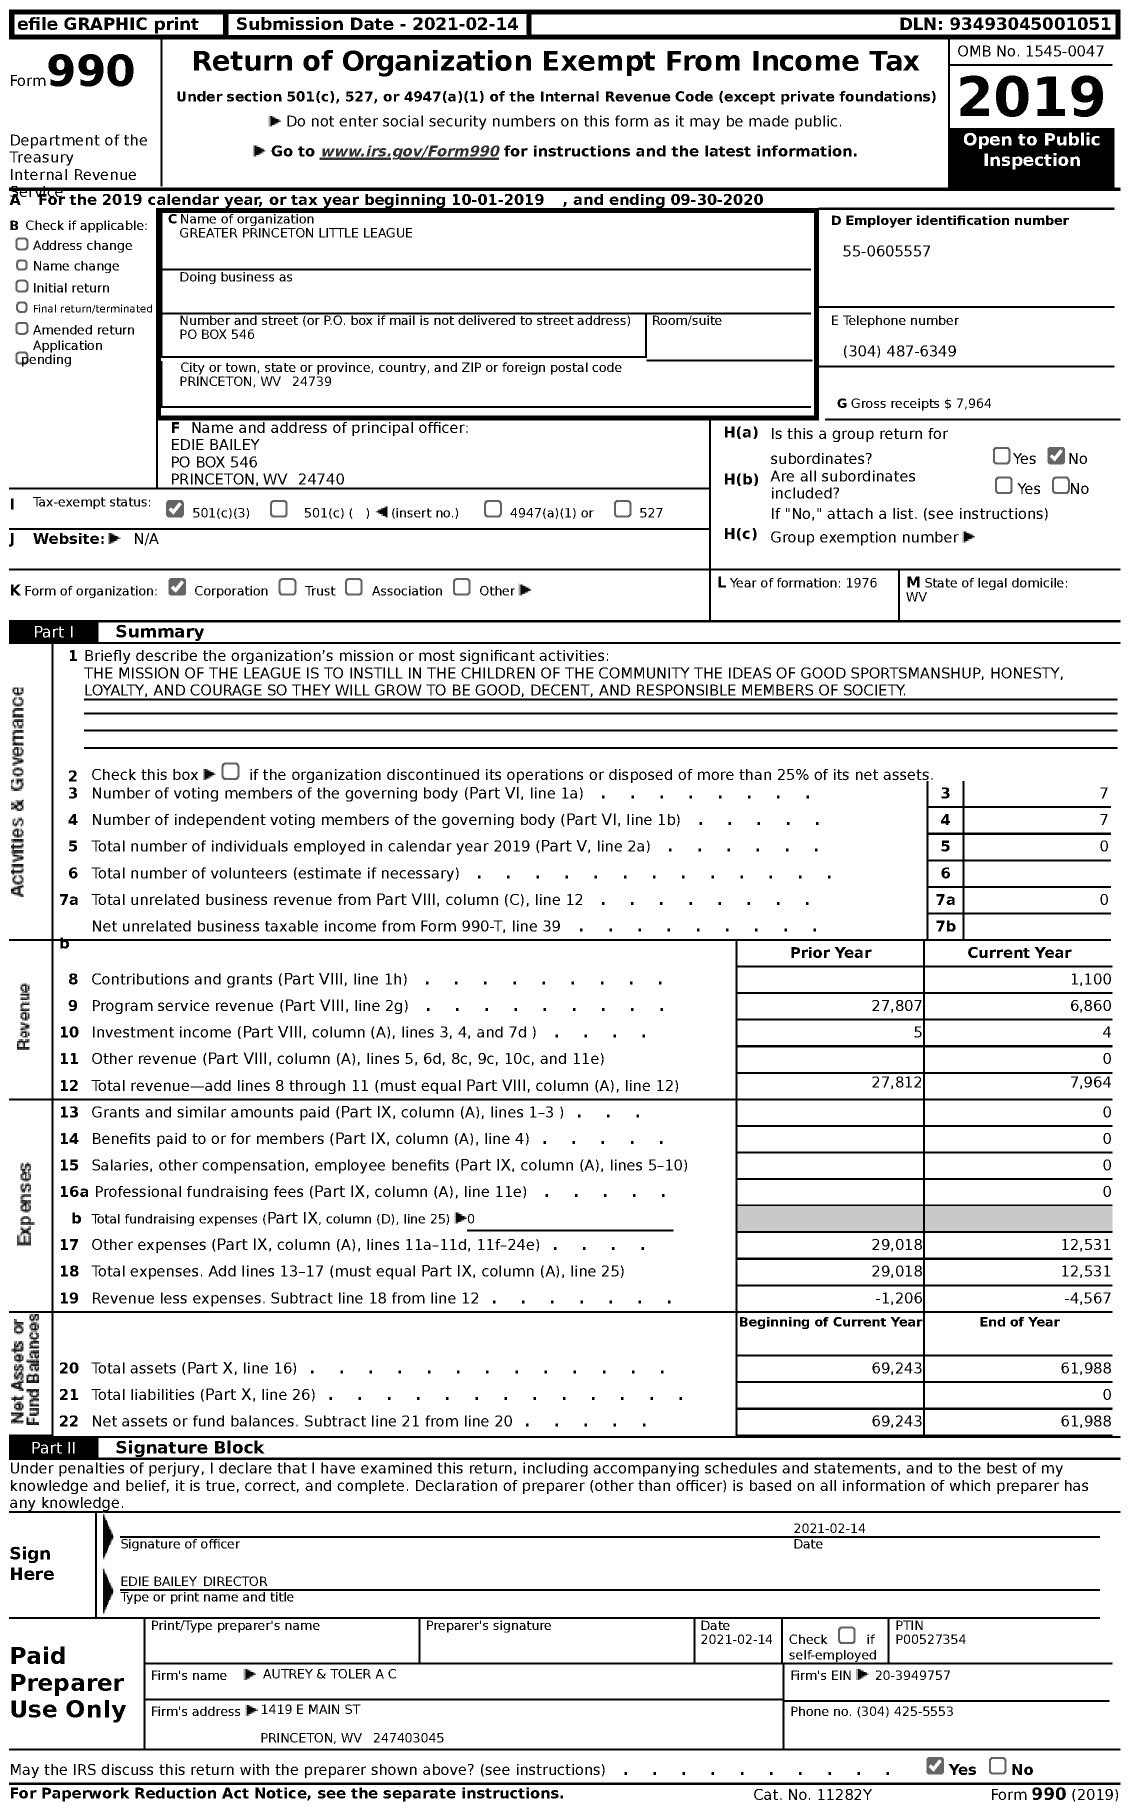 Image of first page of 2019 Form 990 for Little League Baseball - 3480419 Greater Princeton LL